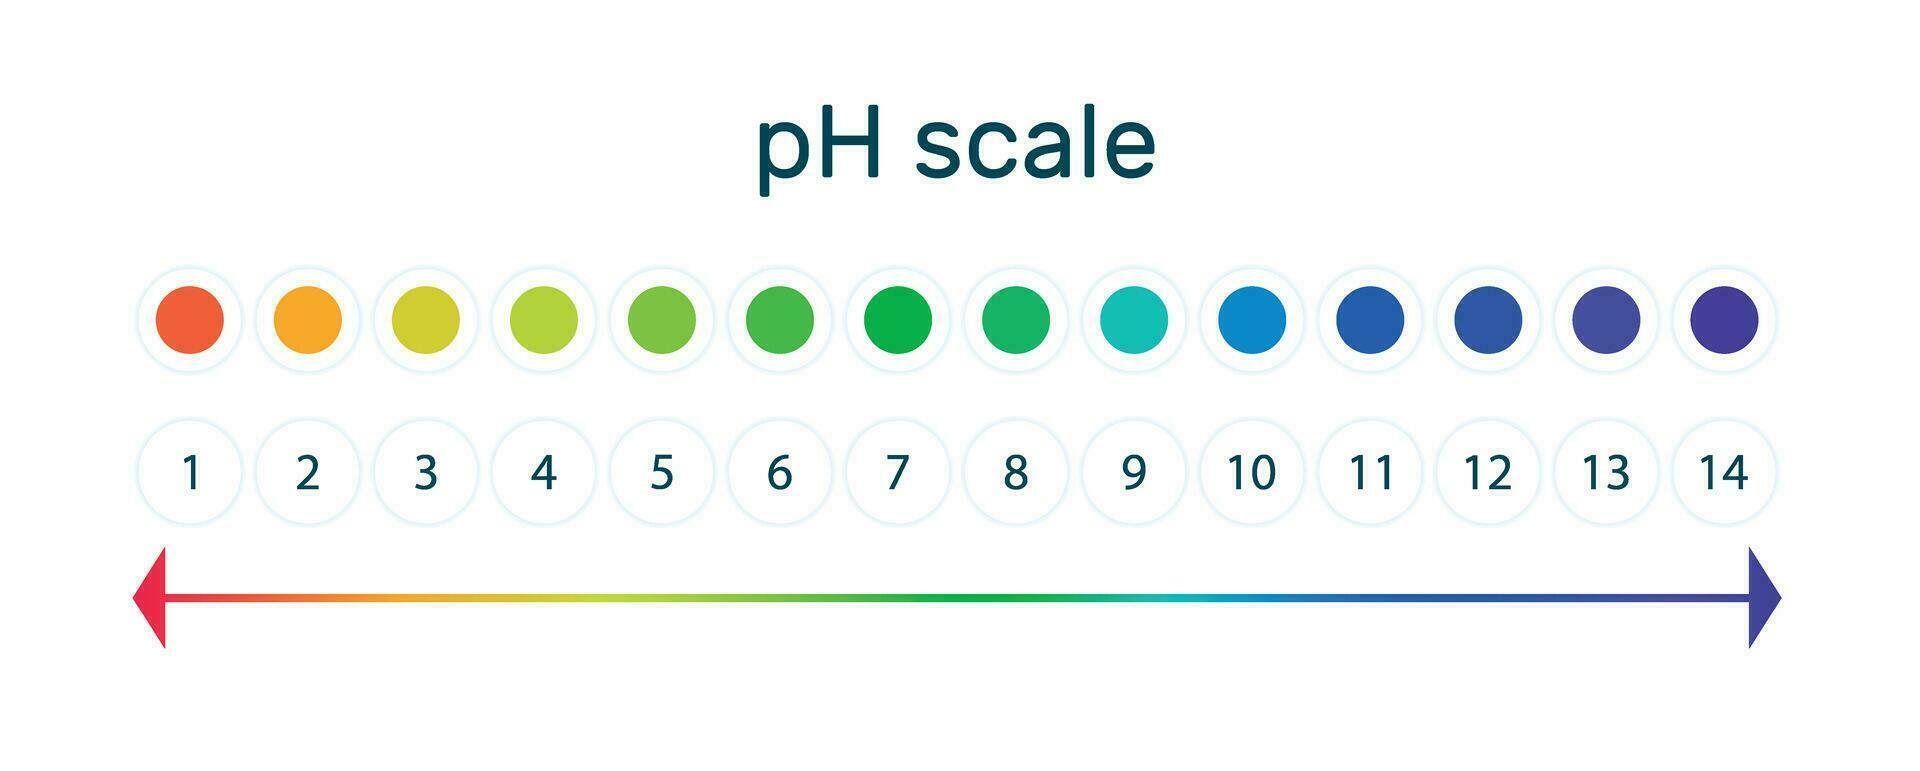 pH value scale indicator chart for acid and alkaline solutions. Vector illustration